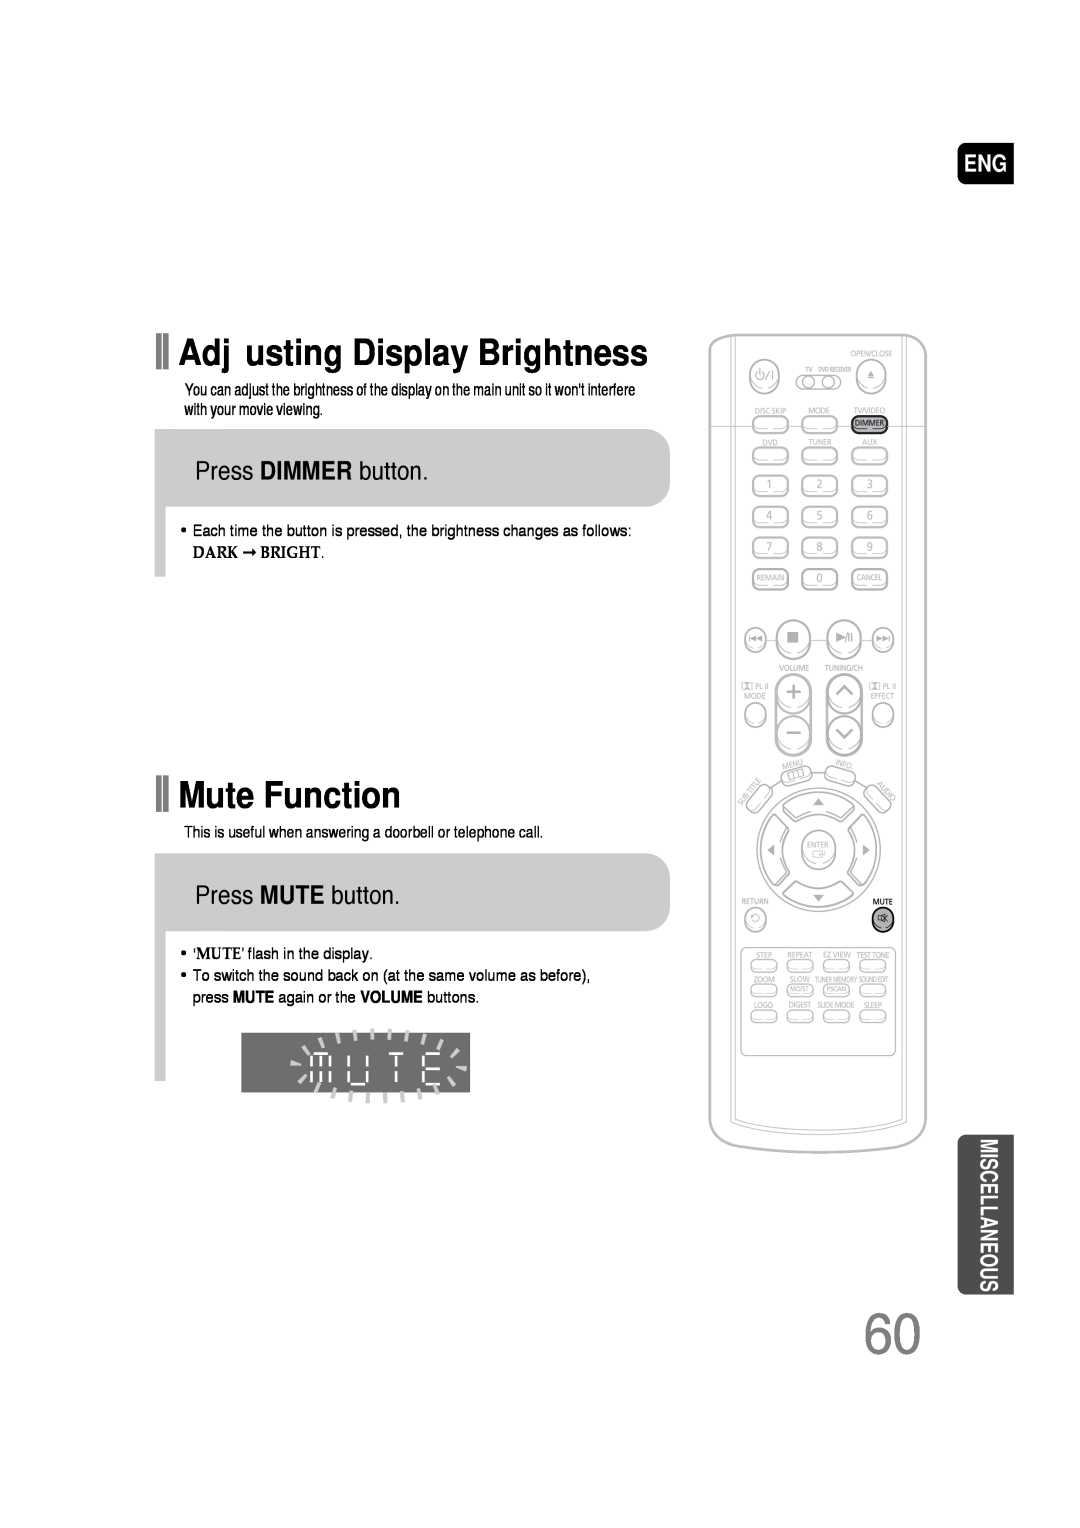 Samsung AH68-01701V Adjusting Display Brightness, Mute Function, Press DIMMER button, Press MUTE button, Miscellaneous 